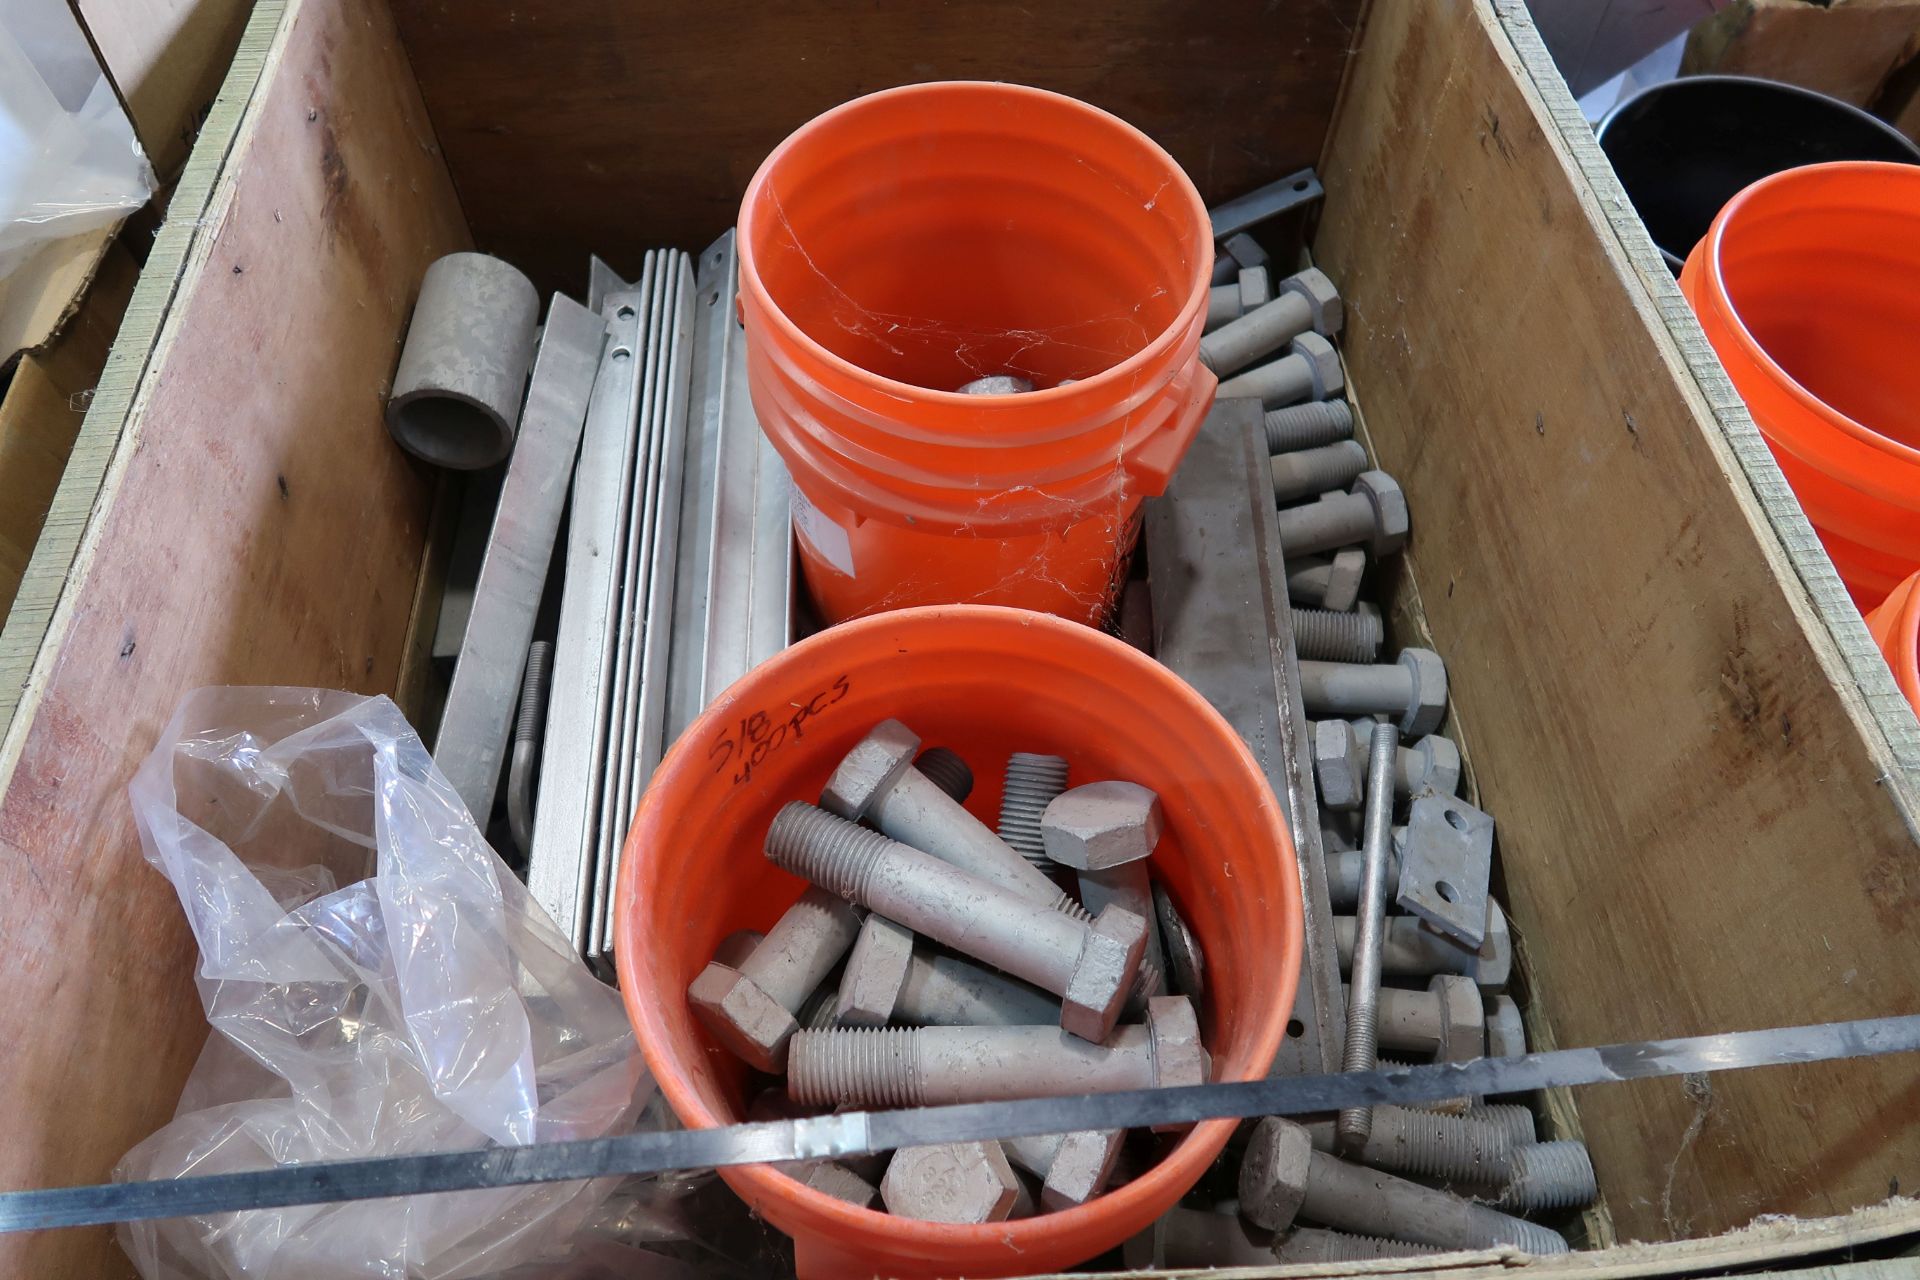 SKID MISCELLANEOUS GALVANIZED TOWER COMPONENTS AND HARDWARE - Image 2 of 2